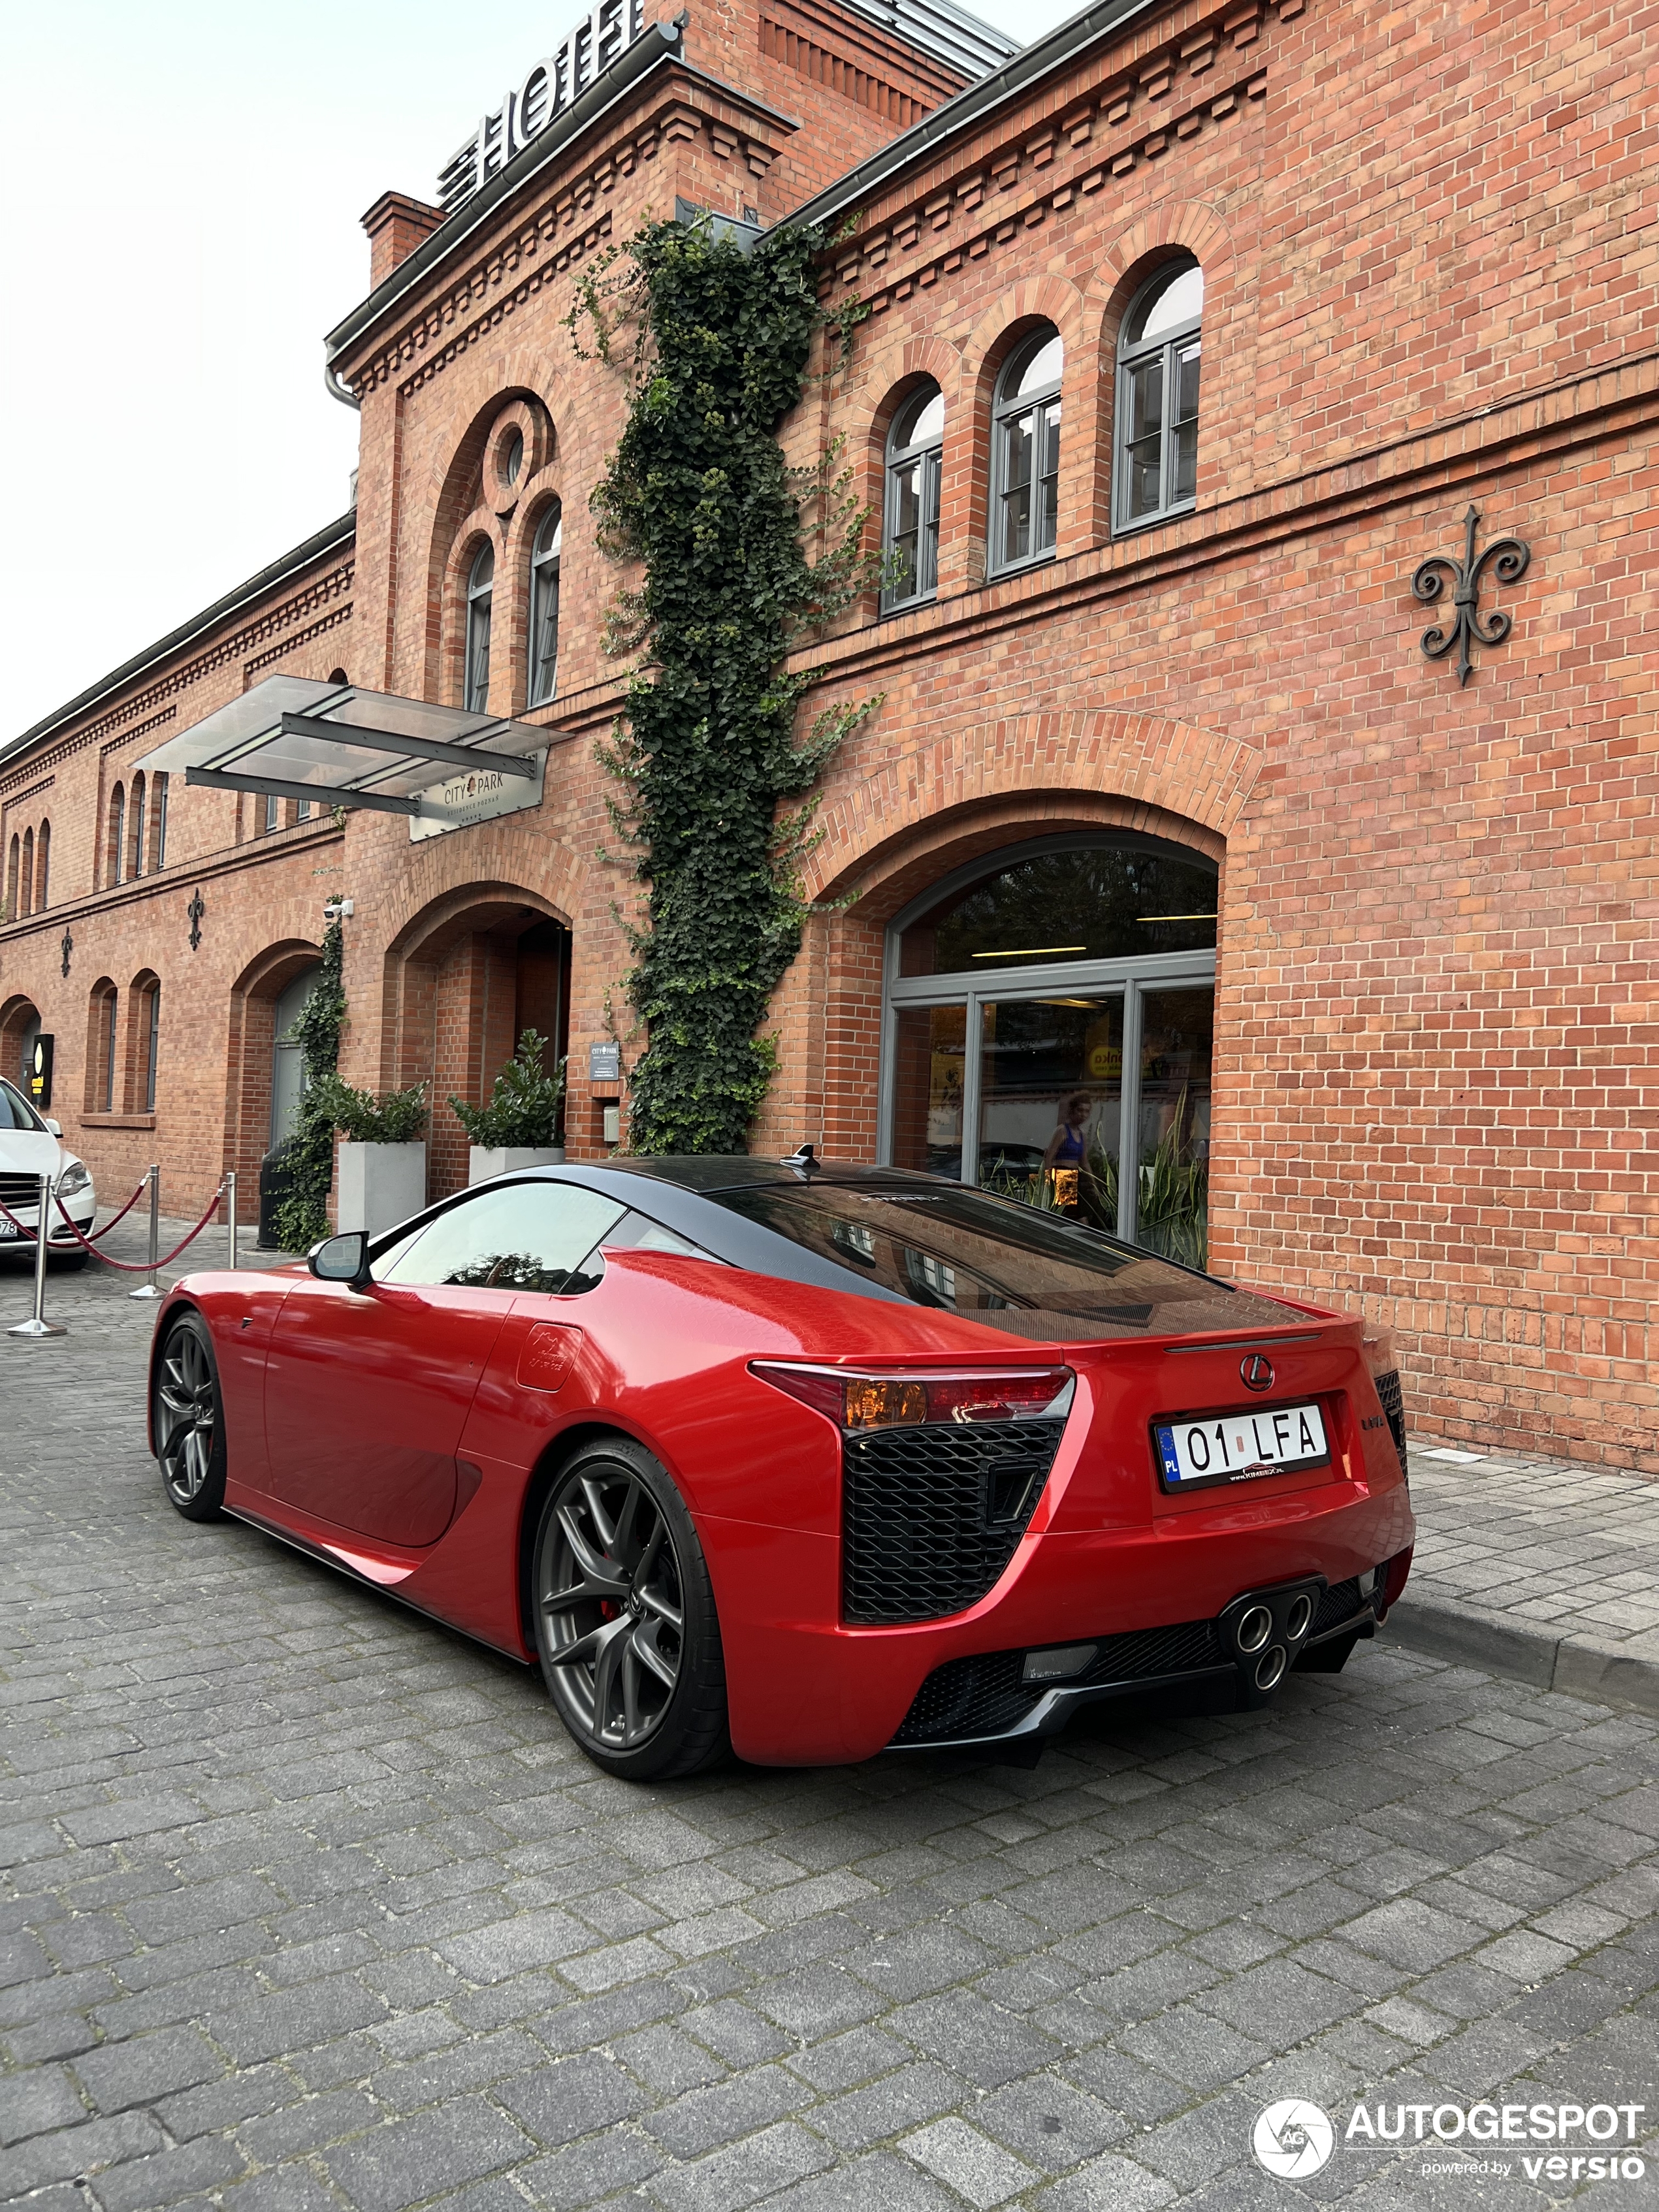 A red LFA shows up in Poznań